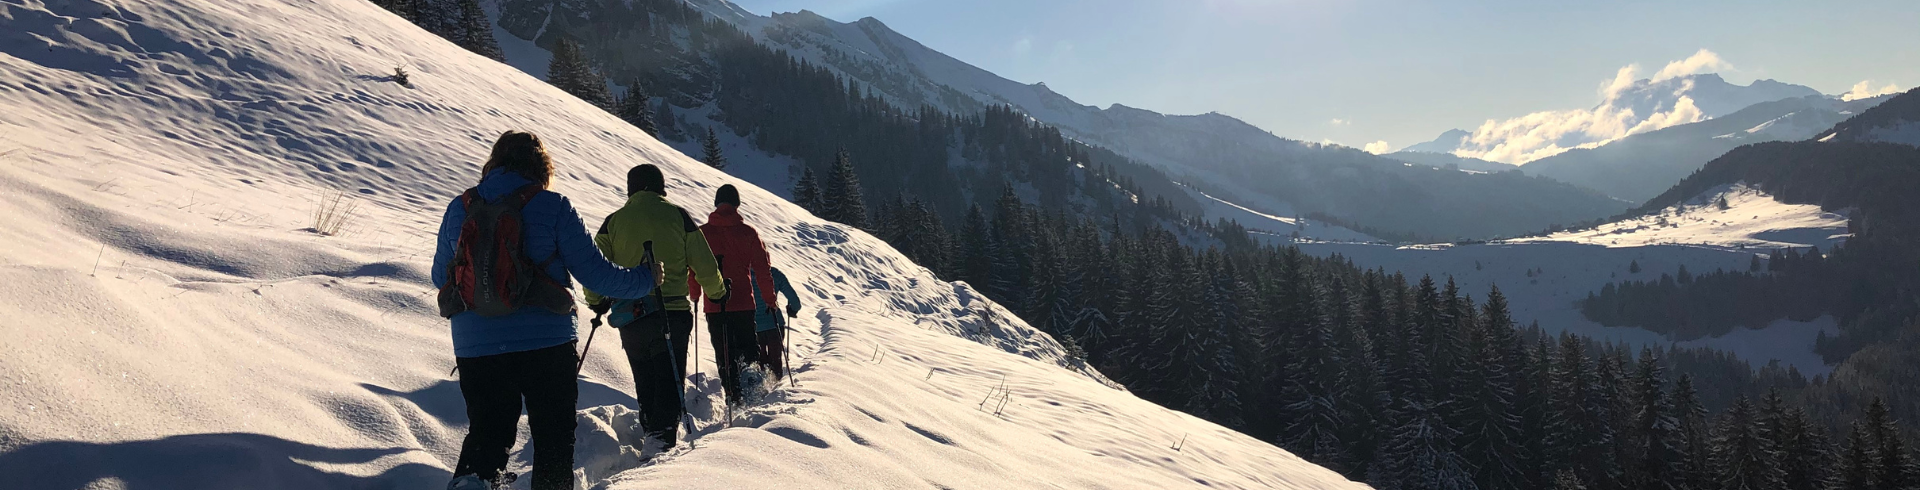 Snowshoeing VS Cross Country Skiing: Which Is Best?